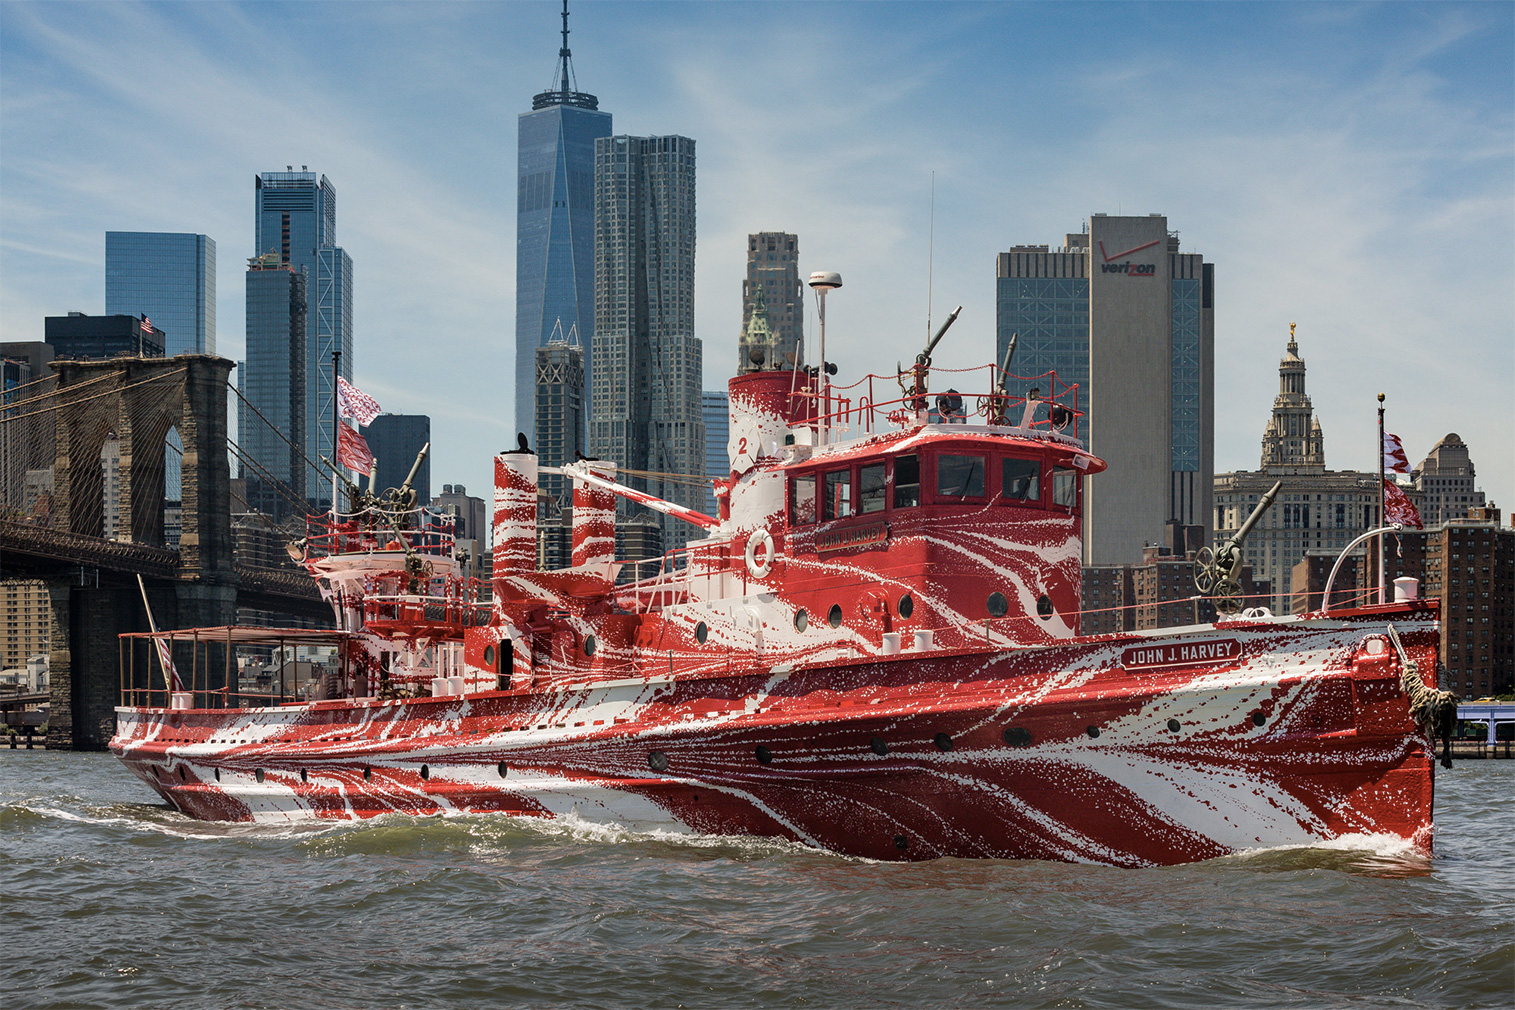 Dazzling fireboat artwork by Tauba Auerbach drops anchor in New York